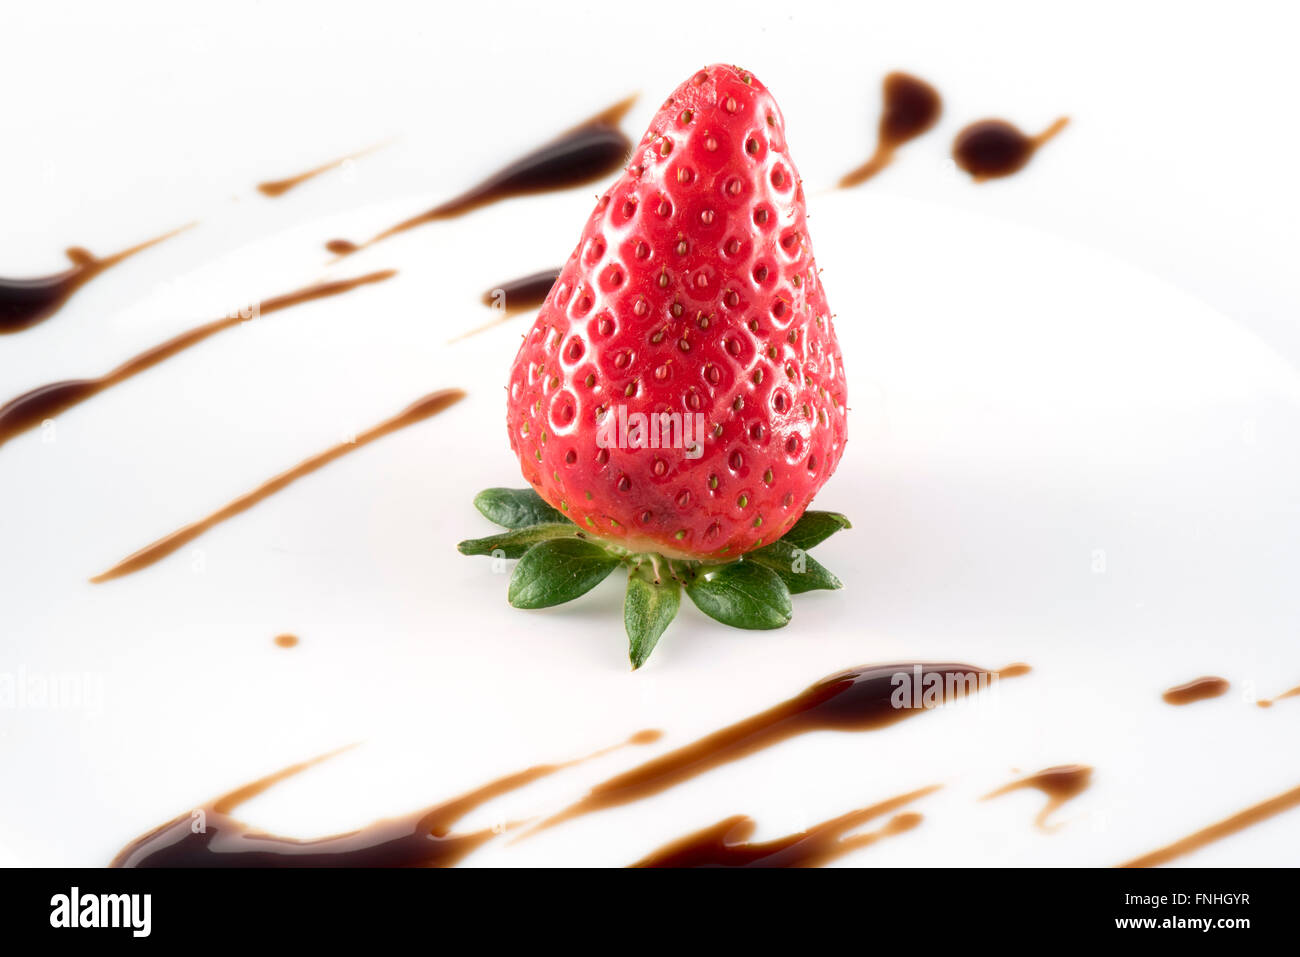 Strawberry with balsamic vinegar on white plate Stock Photo